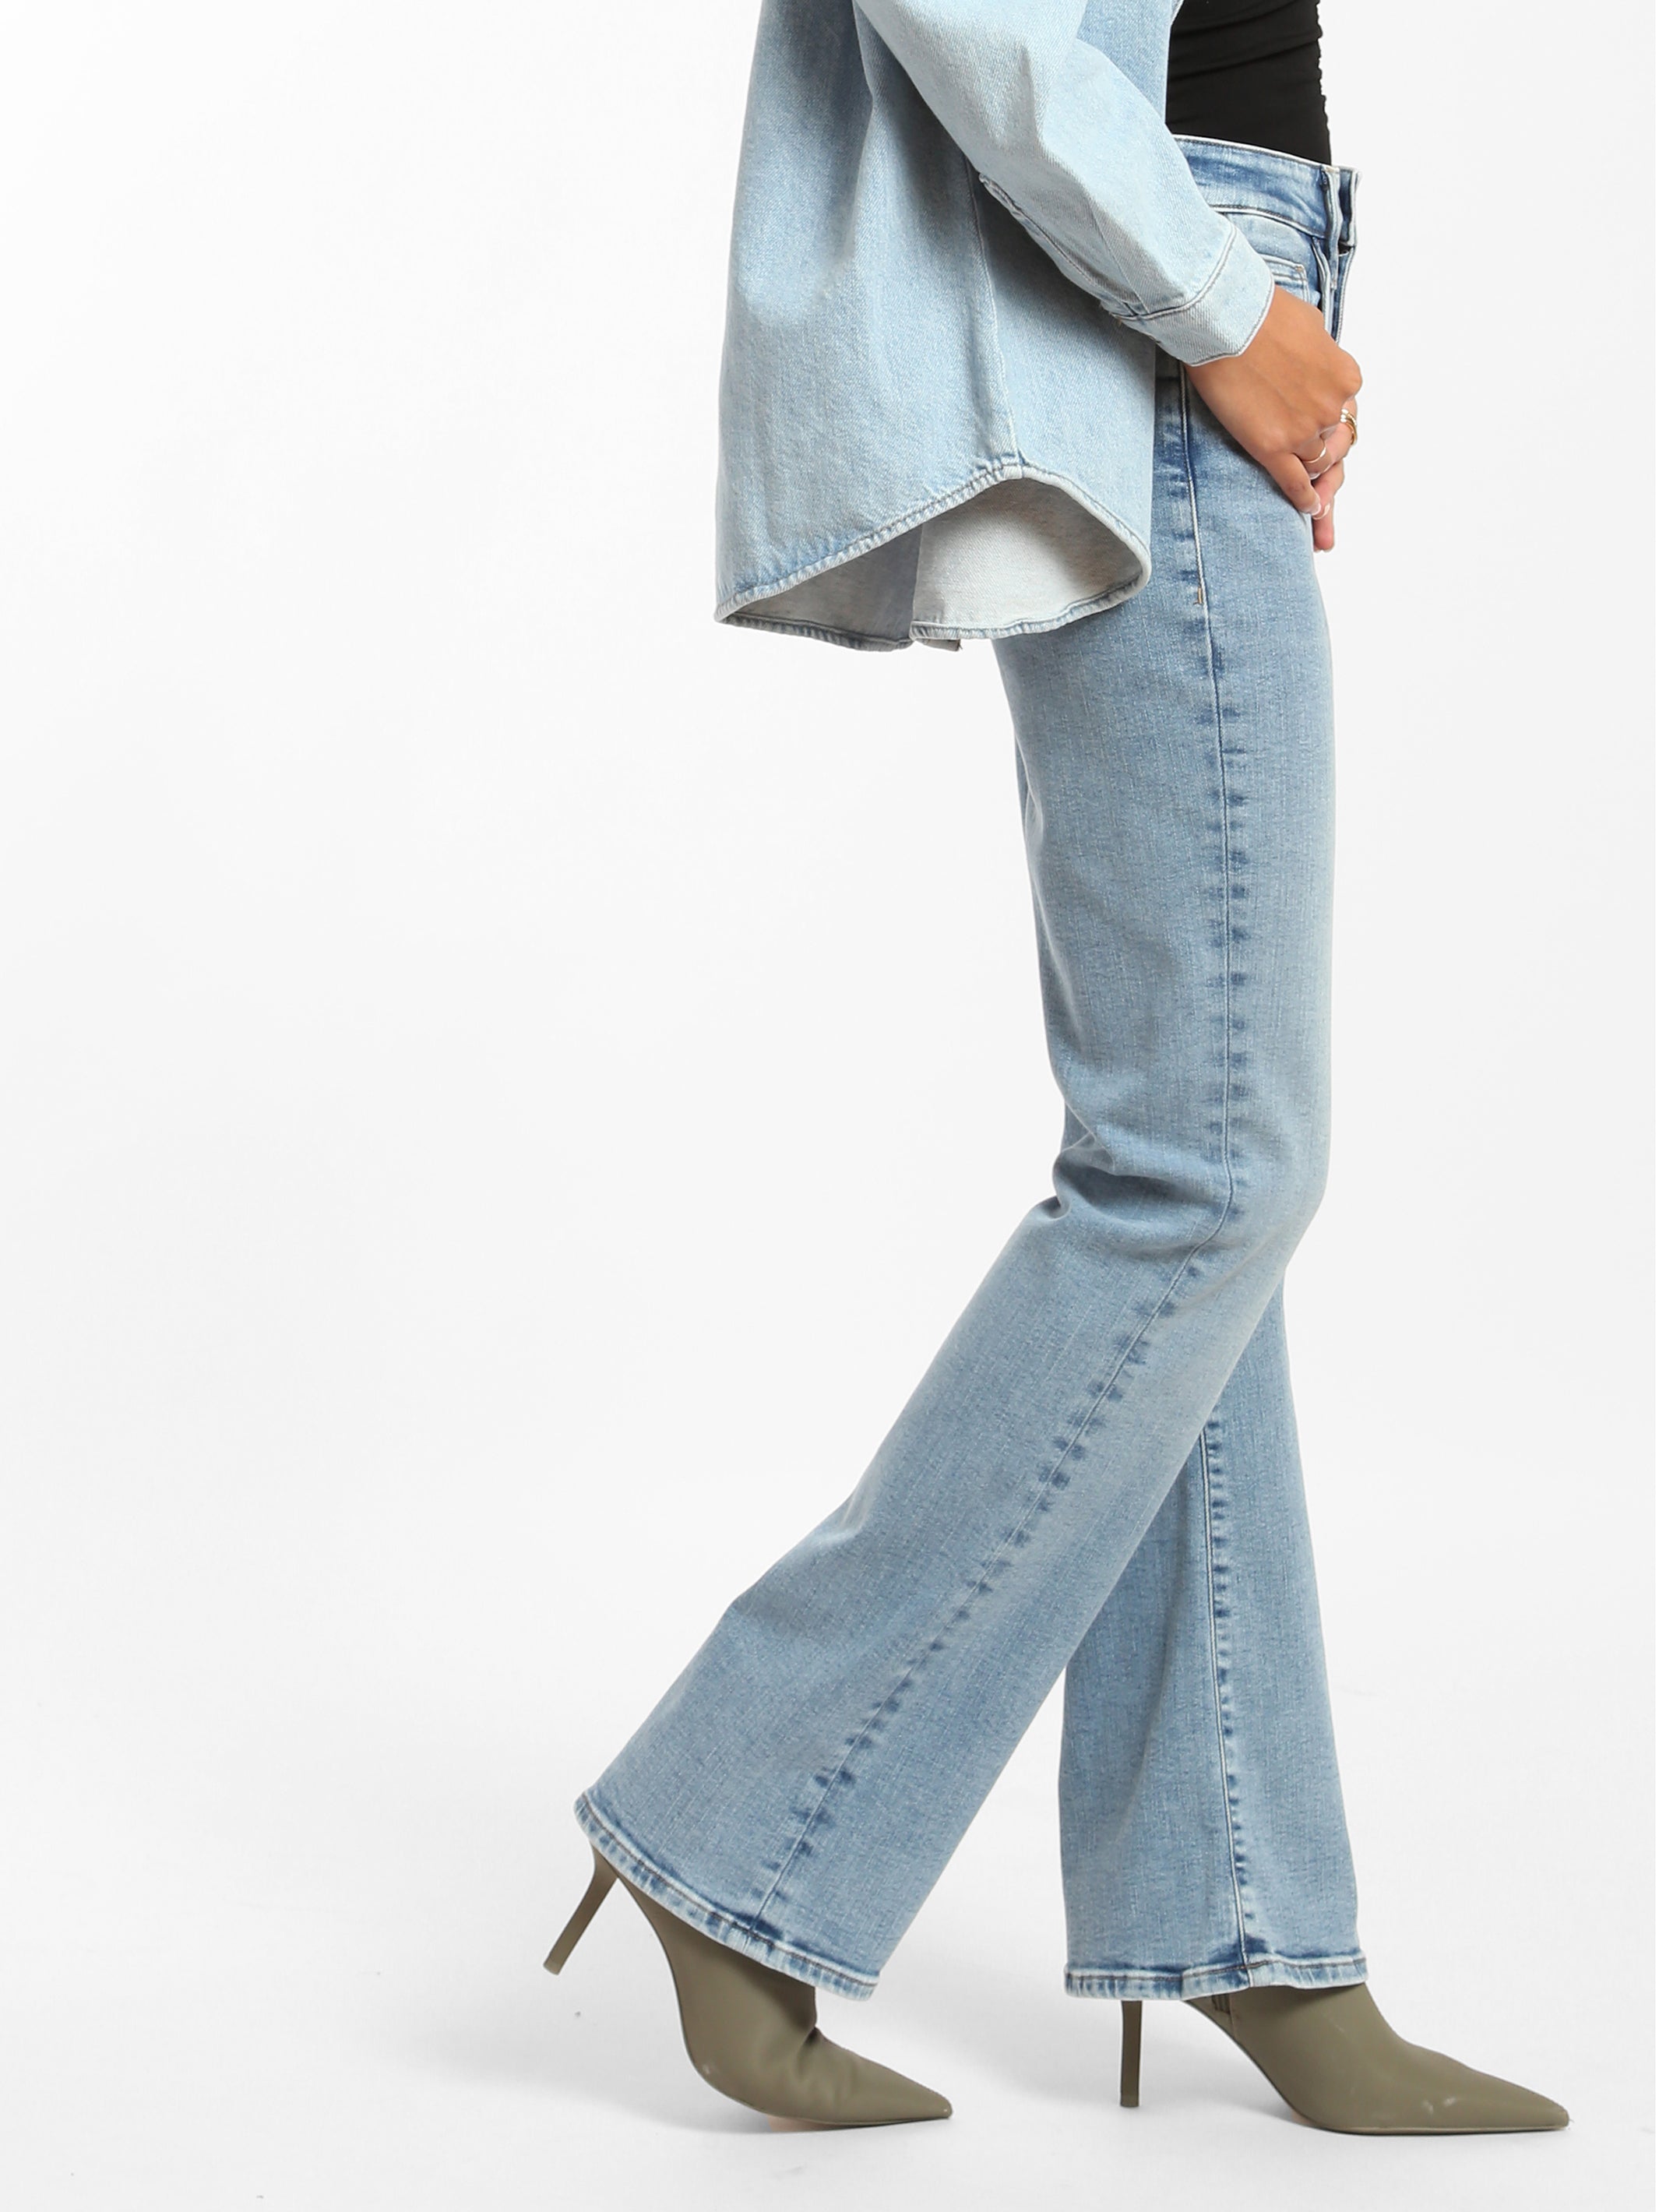 Maple High Rise Bootcut Jeans in Light Brushed Denim - BROOKLYN INDUSTRIES